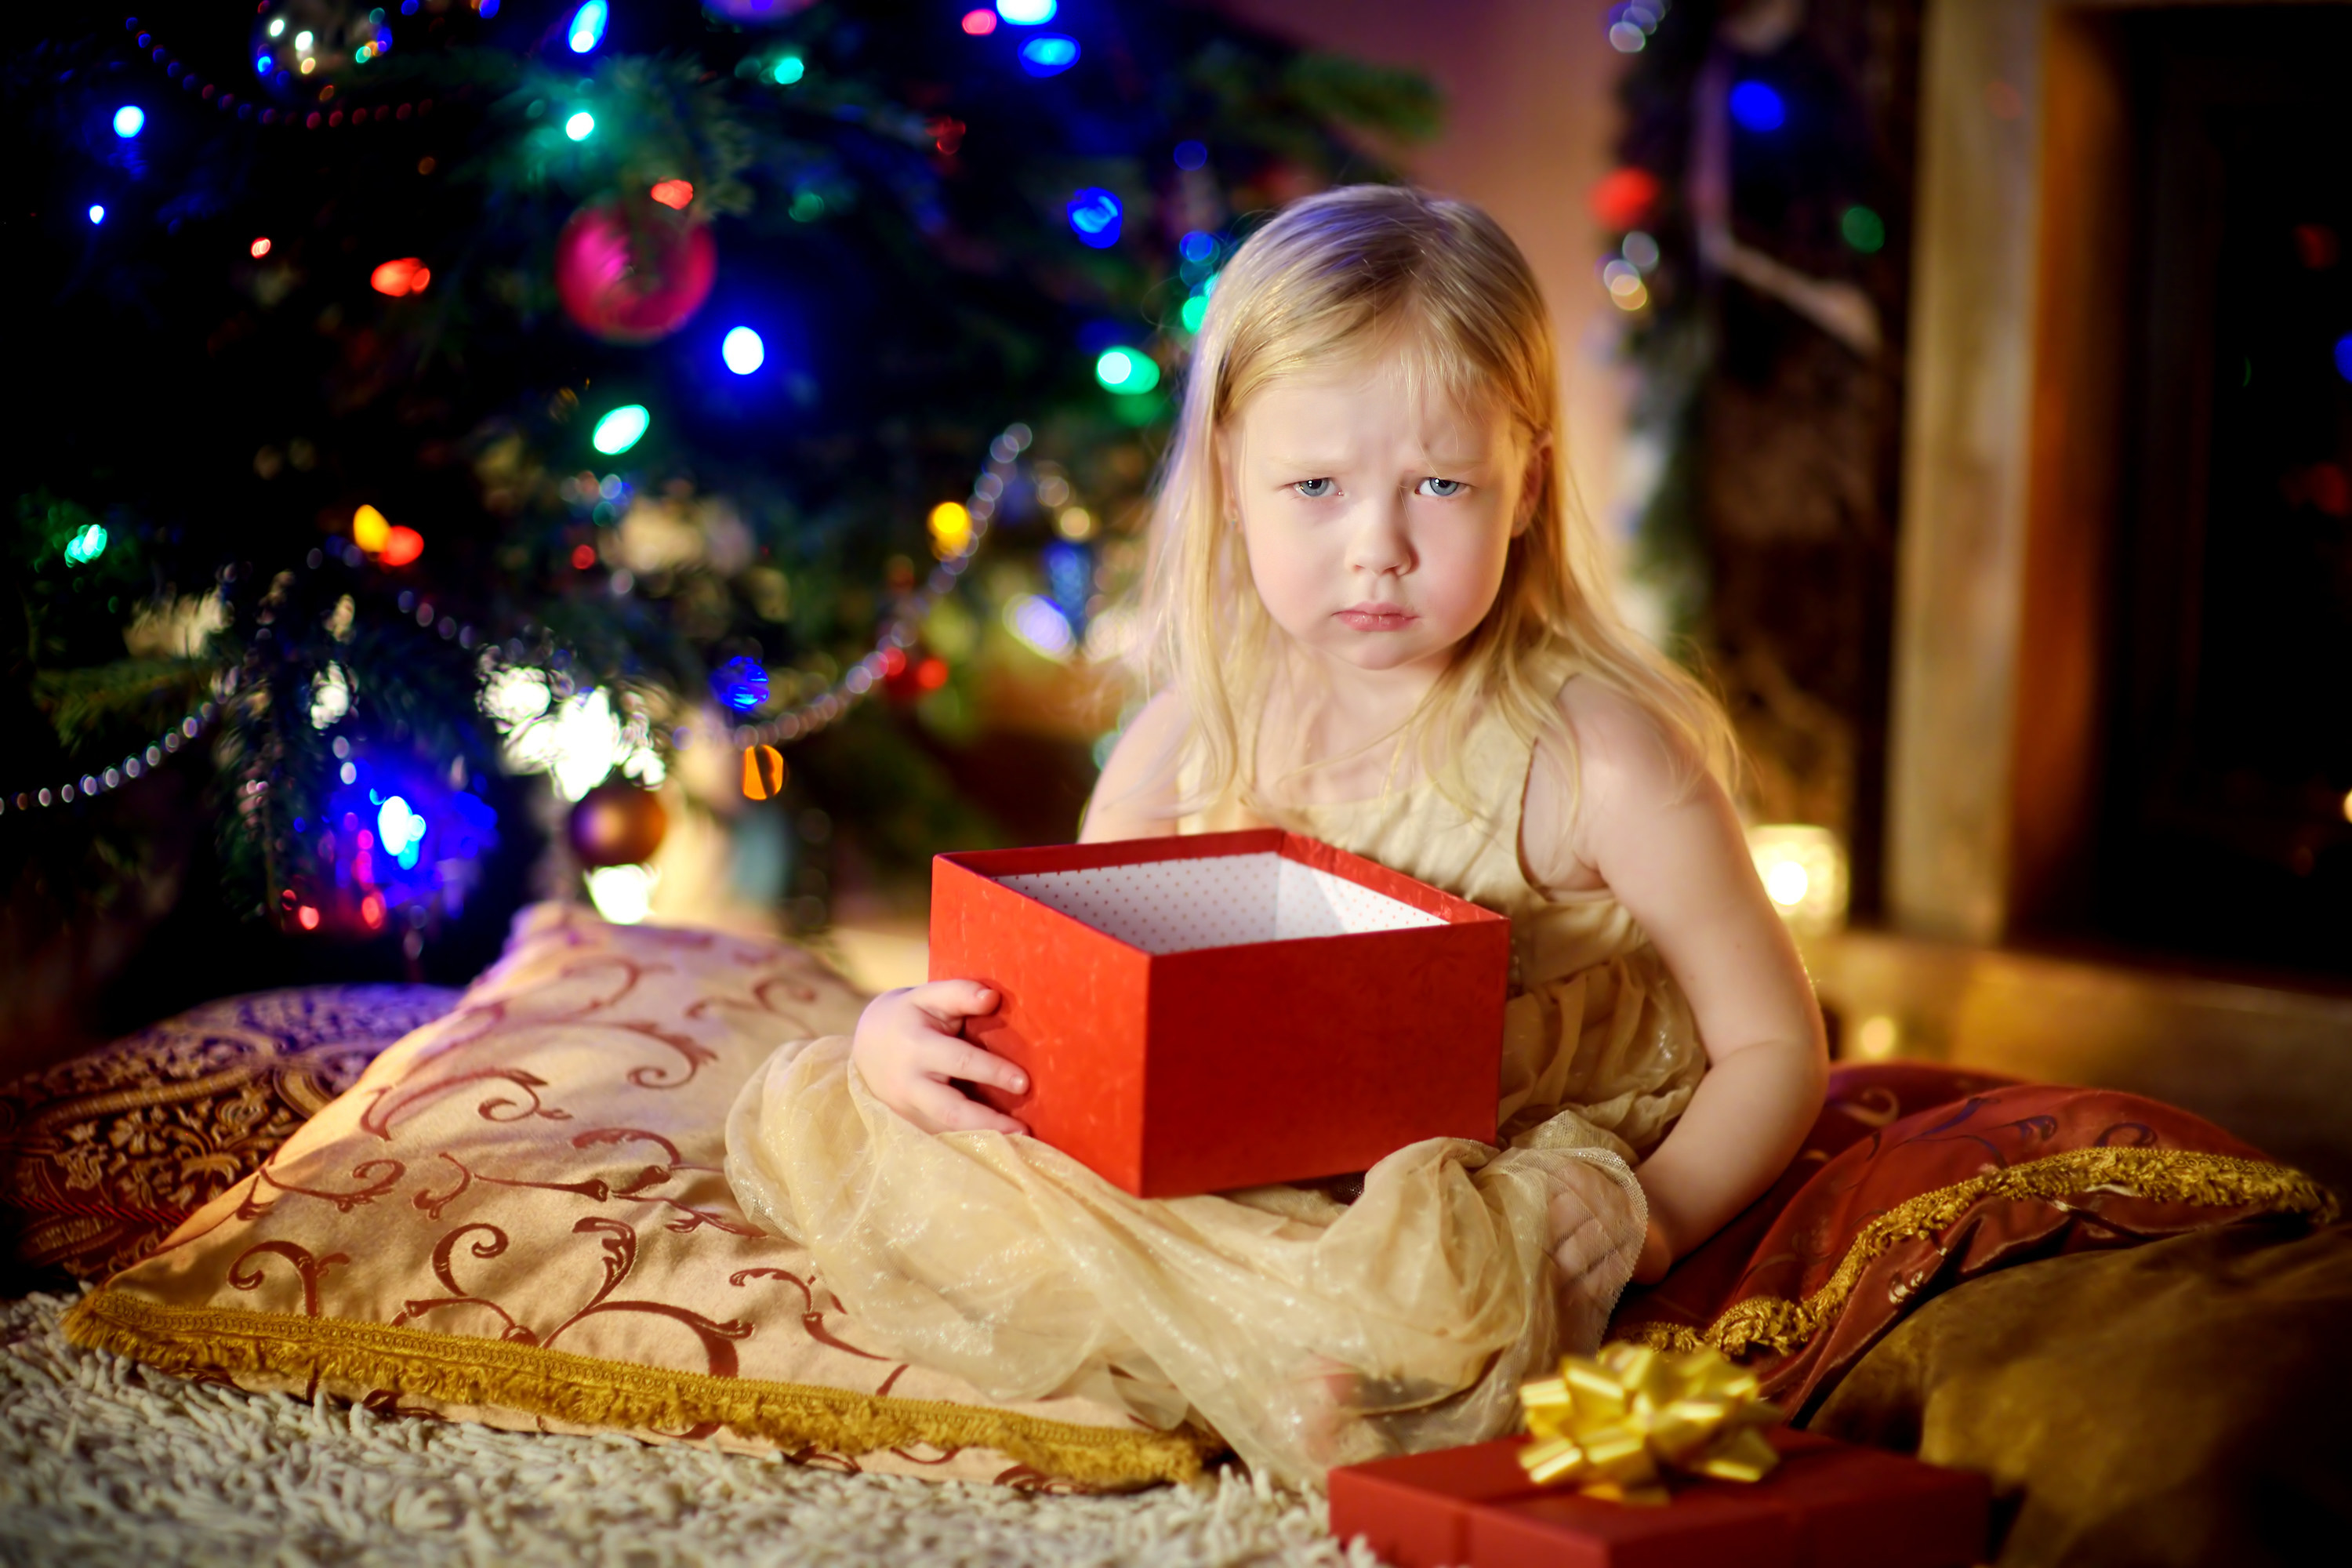 A little girl looking mad while holding an empty gift box